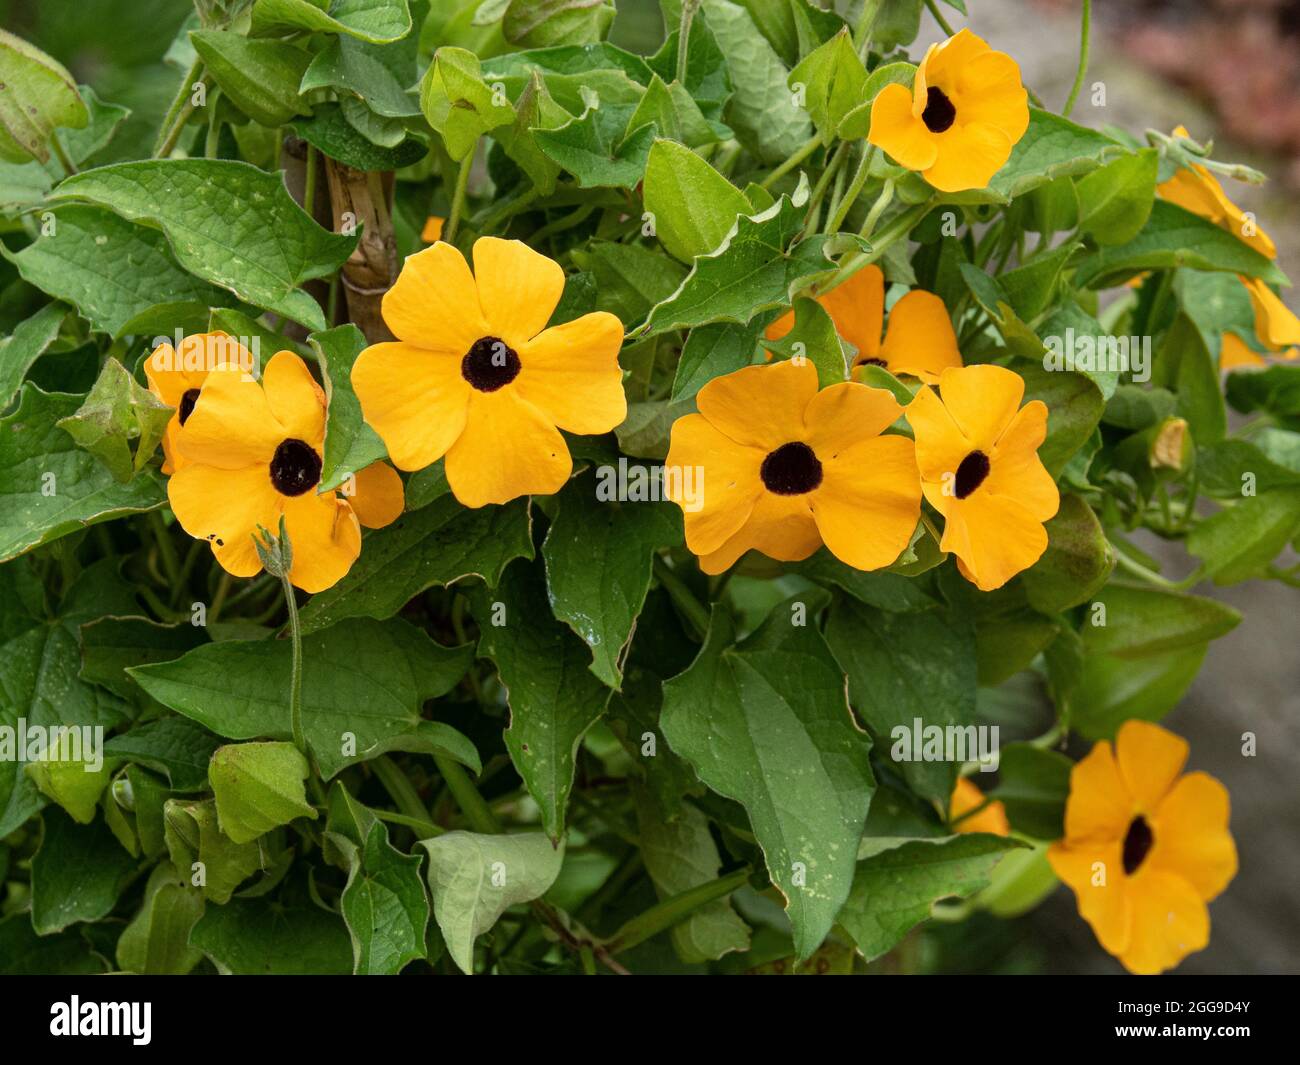 A group of the yellow flowers of the annual climber Thunbergia alata - Black Eyed Susan Stock Photo